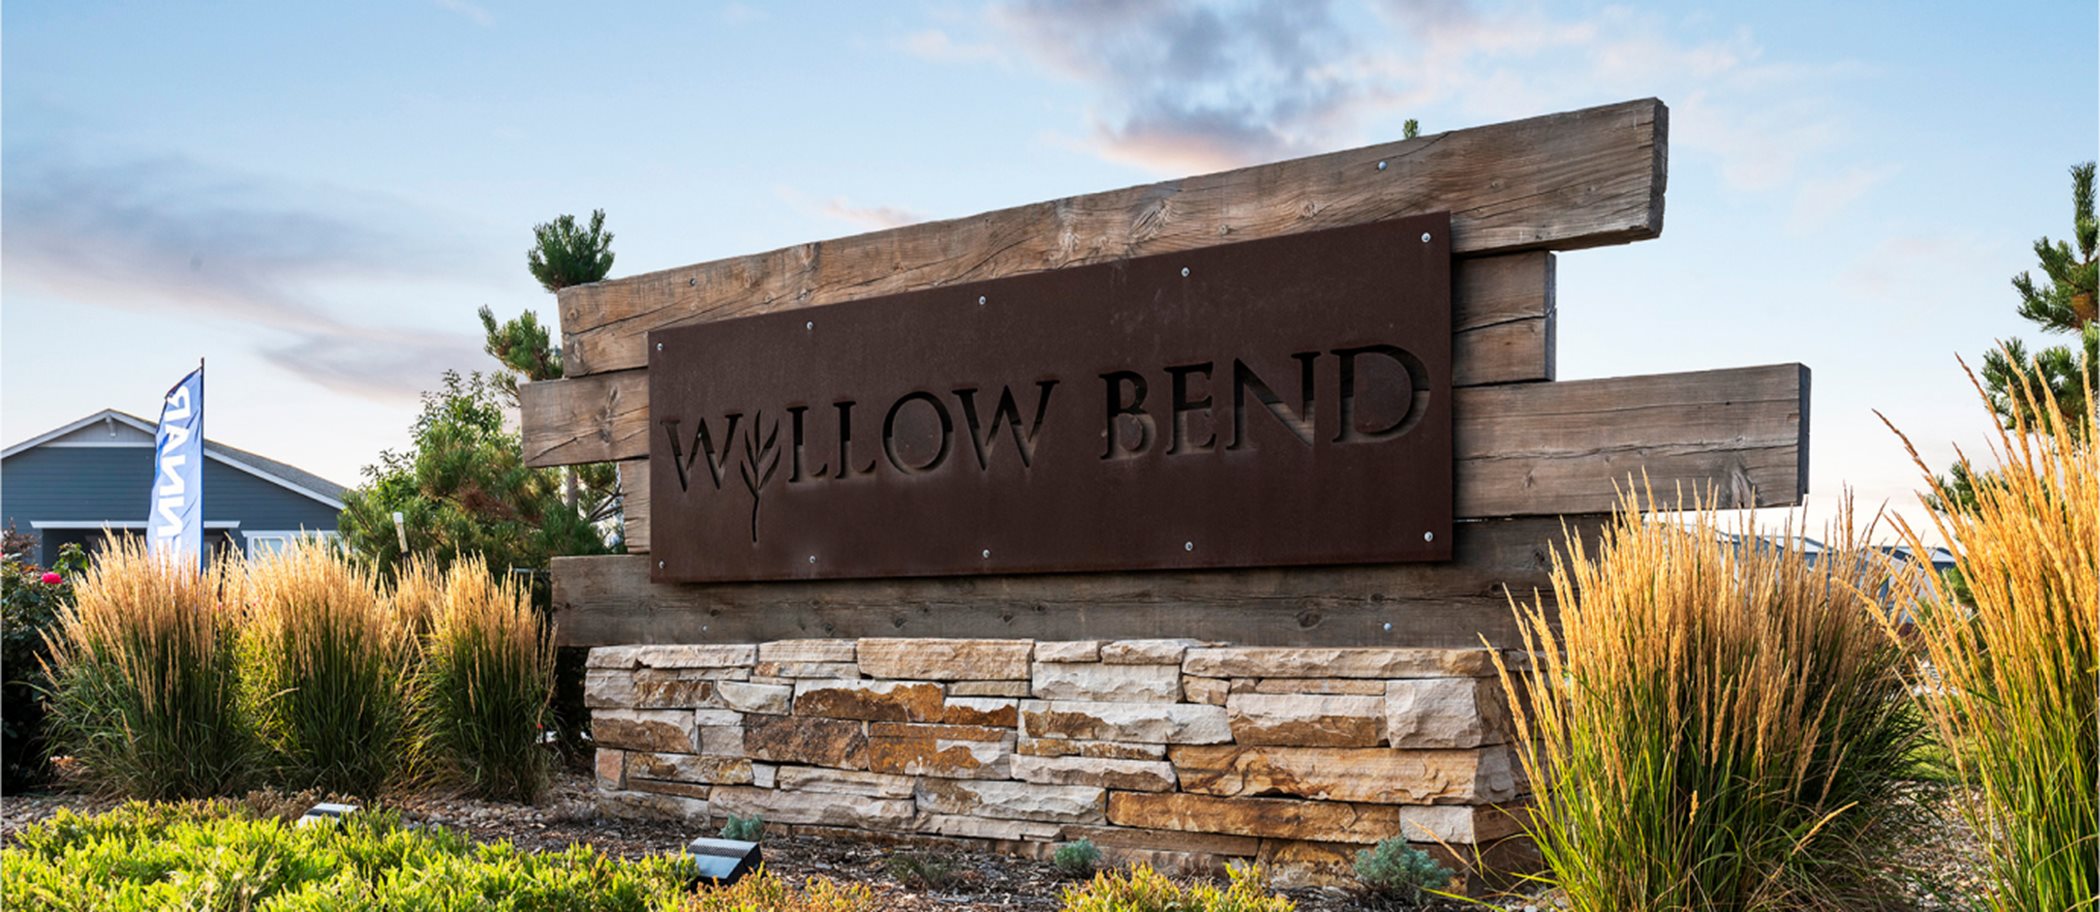 Willow Bend welcome sign